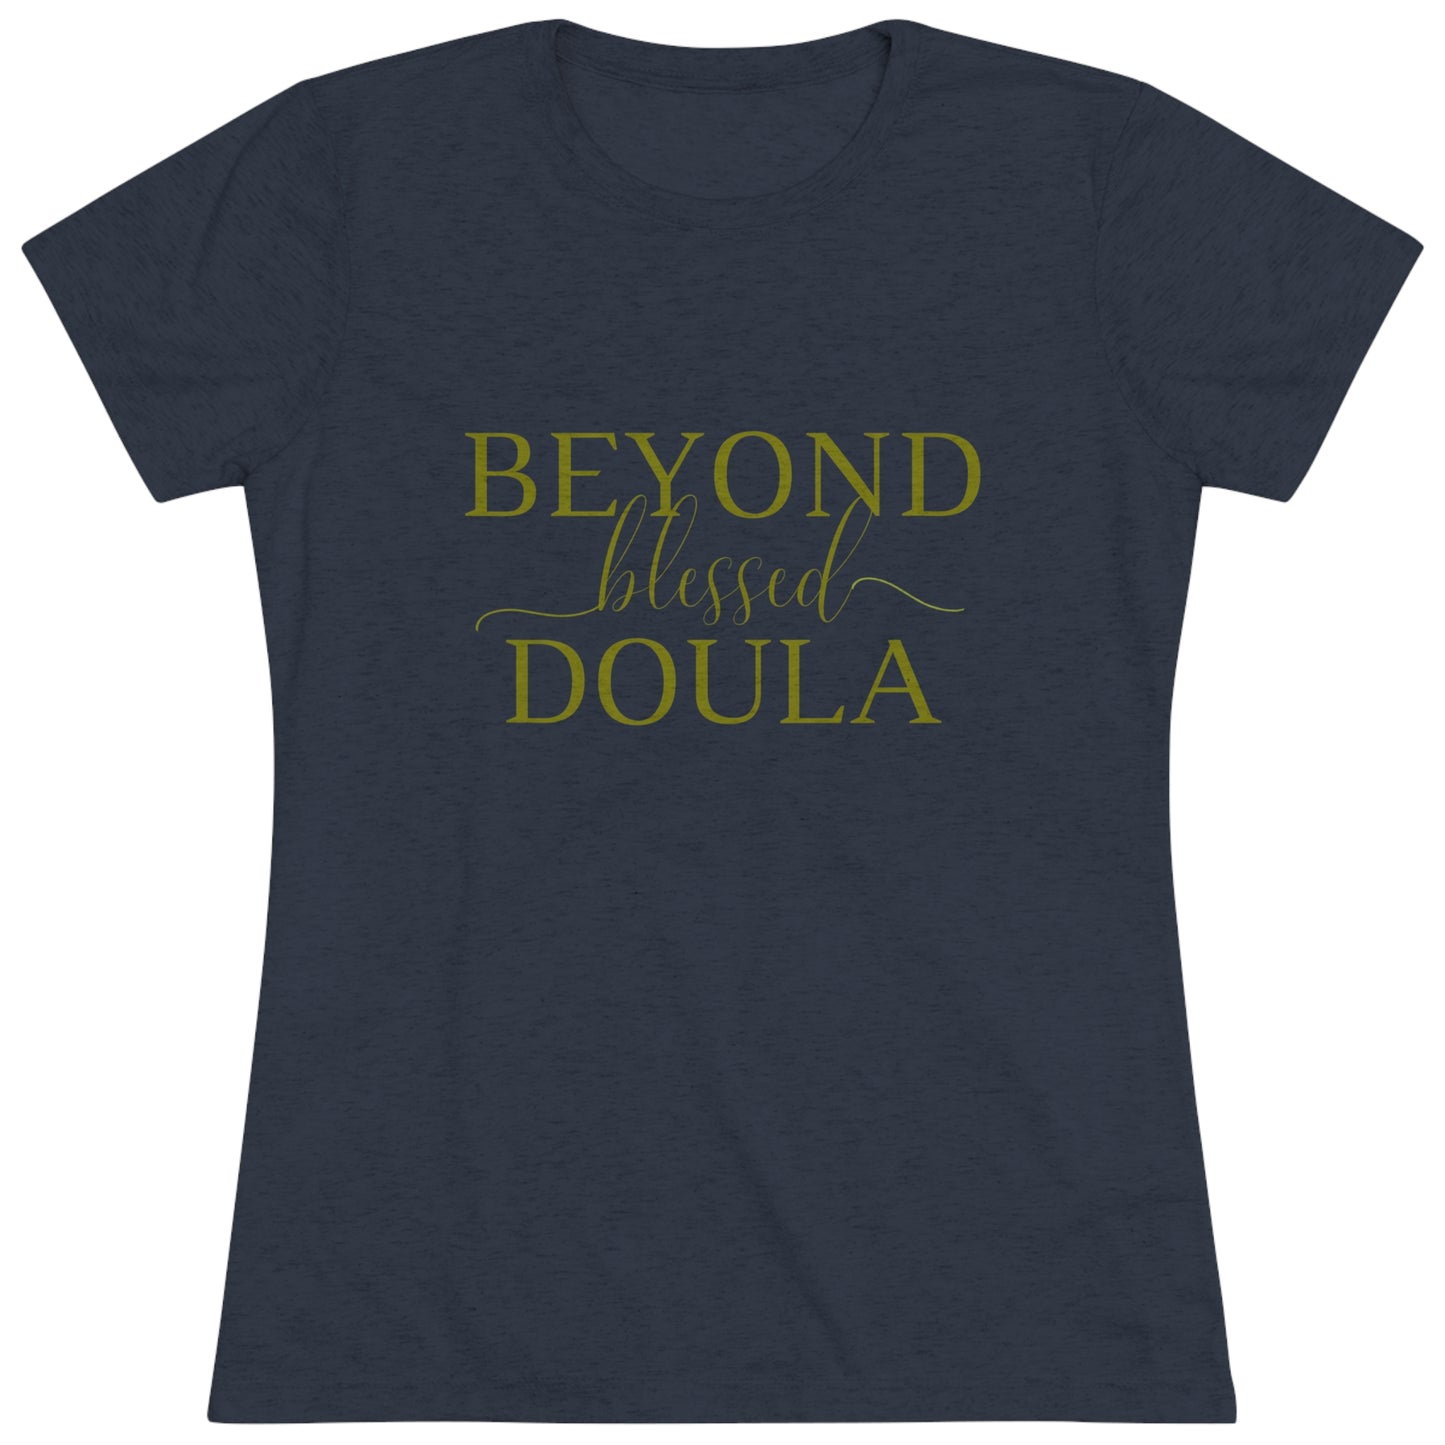 Beyond Blessed Doula - Women's Triblend Tee - Olive Green